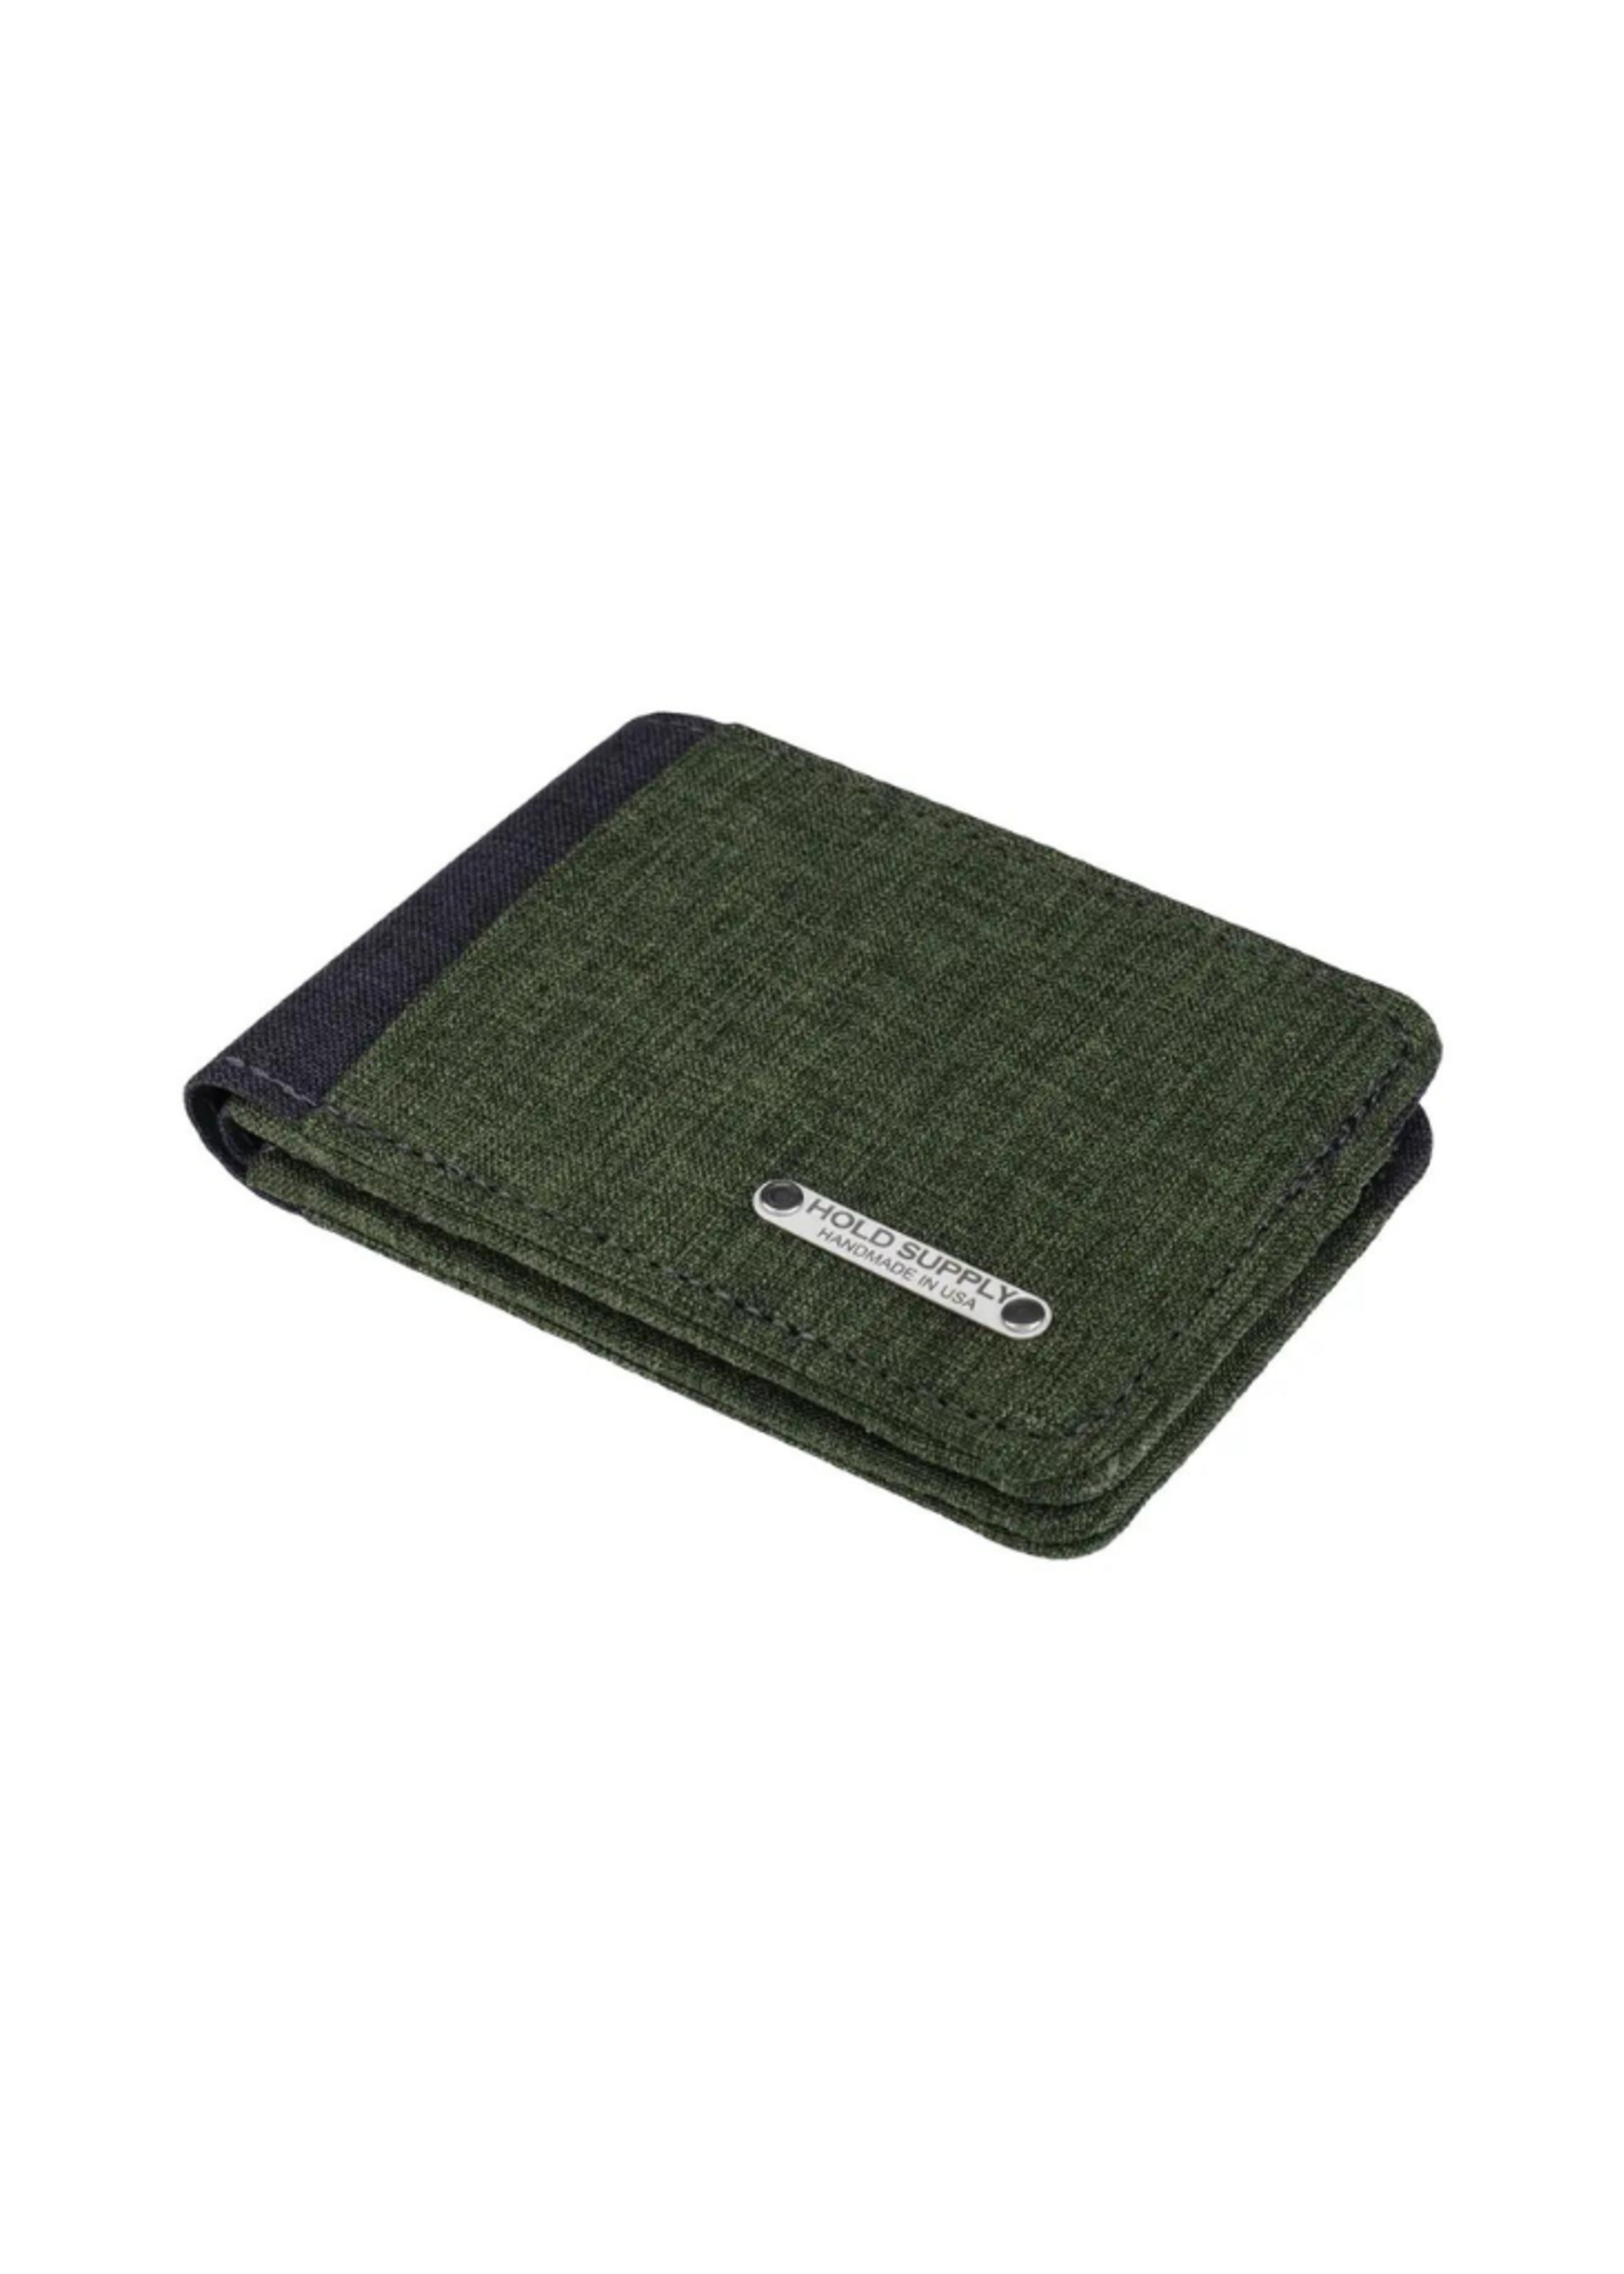 Hold Supply Co Green / Gray Fabric Bifold Wallet